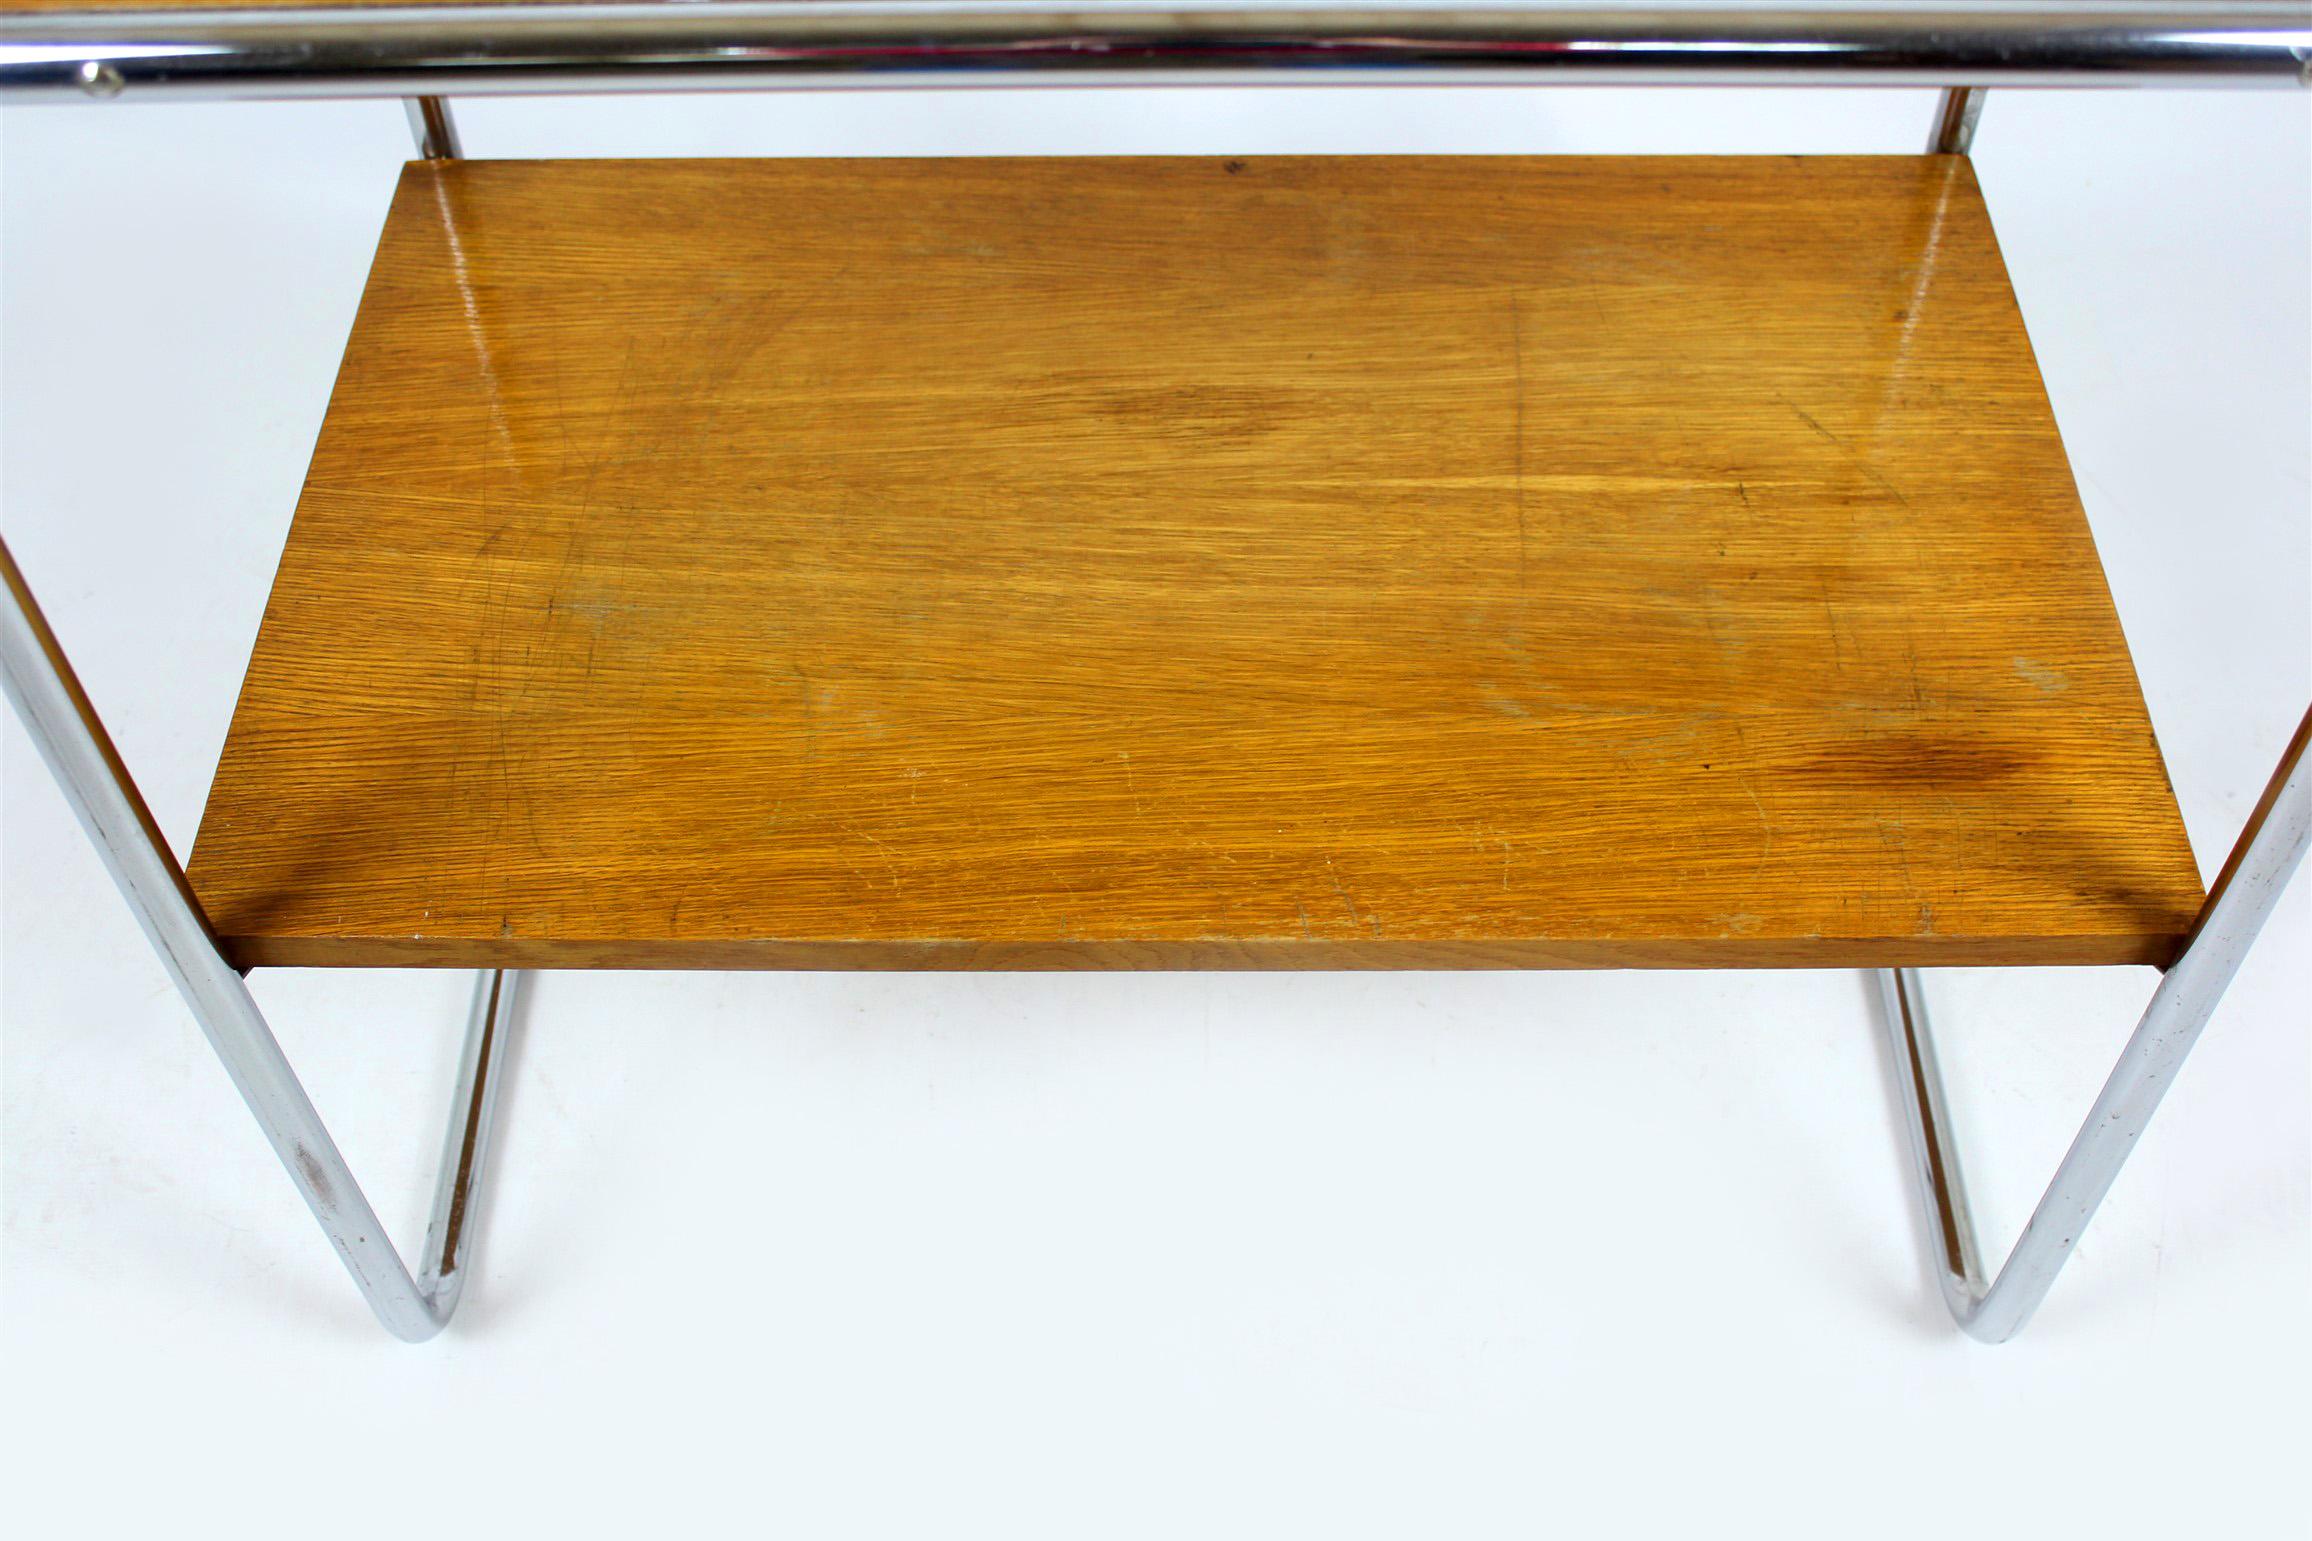 B12 Console Table by Marcel Breuer for Thonet, 1930s (Tschechisch)